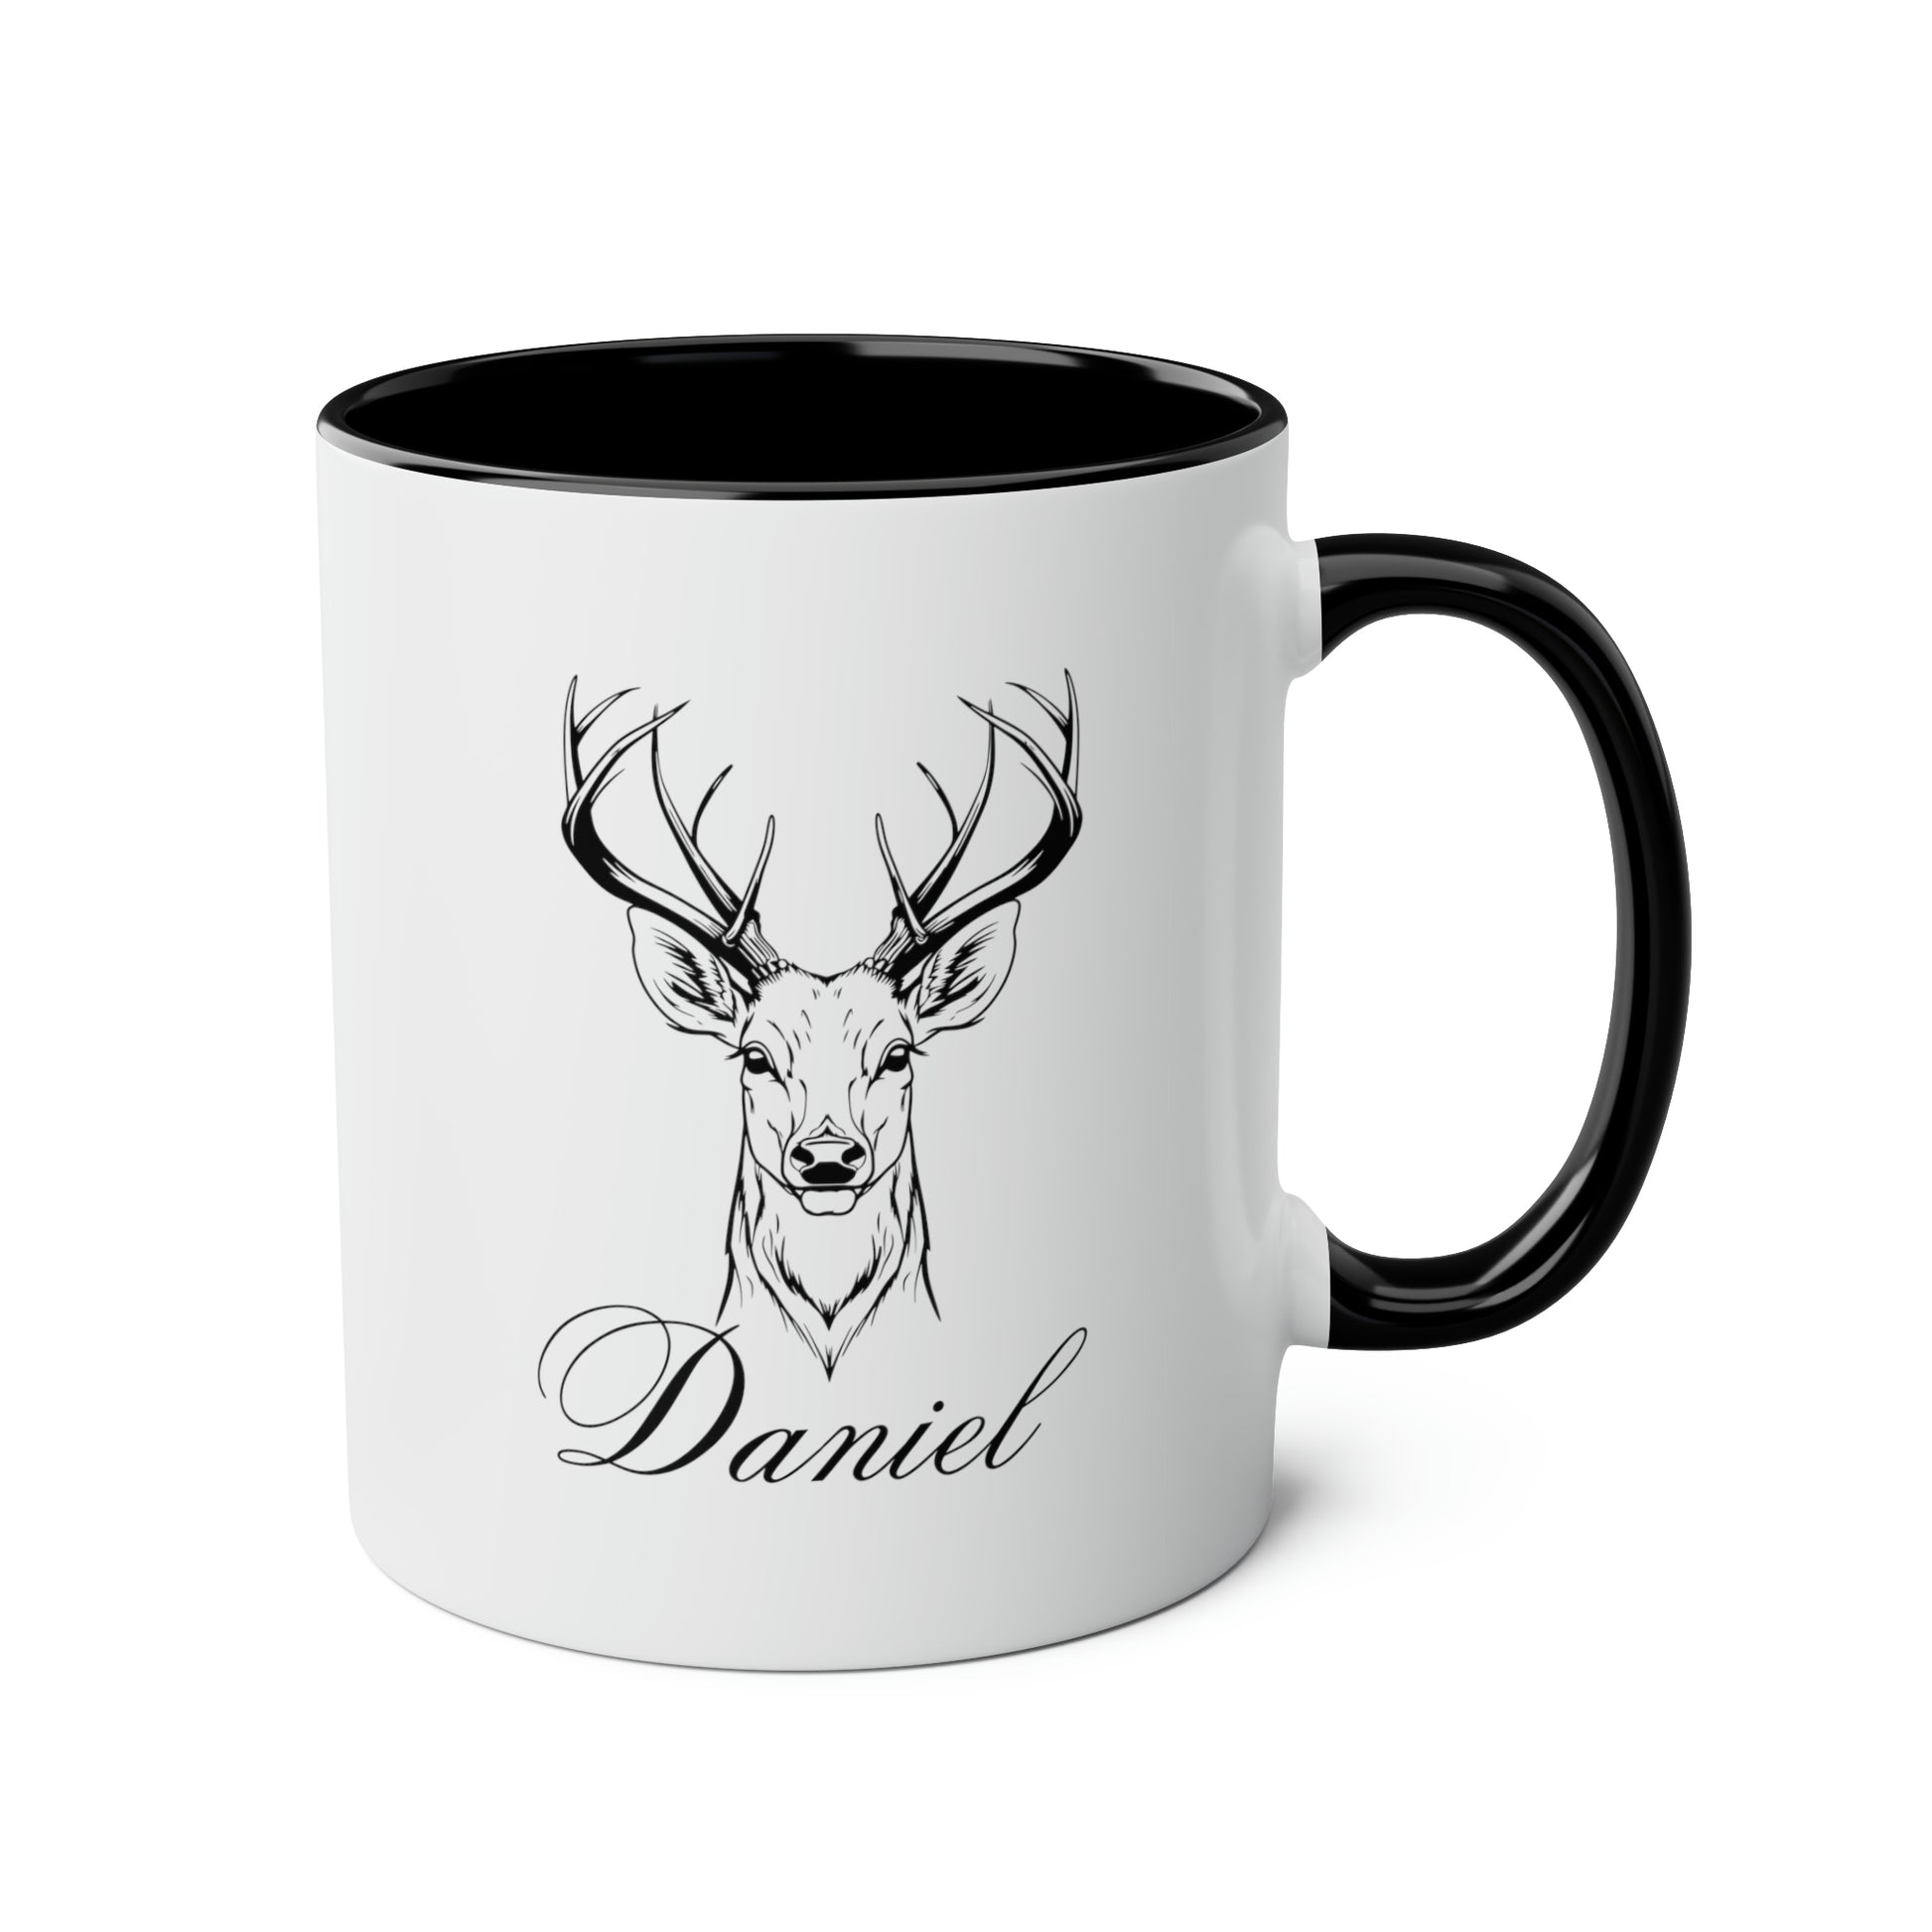 Reindeer Name 11oz white with black accent funny large coffee mug gift for deer hunter hunting wildlife lover custom name customize waveywares wavey wares wavywares wavy wares